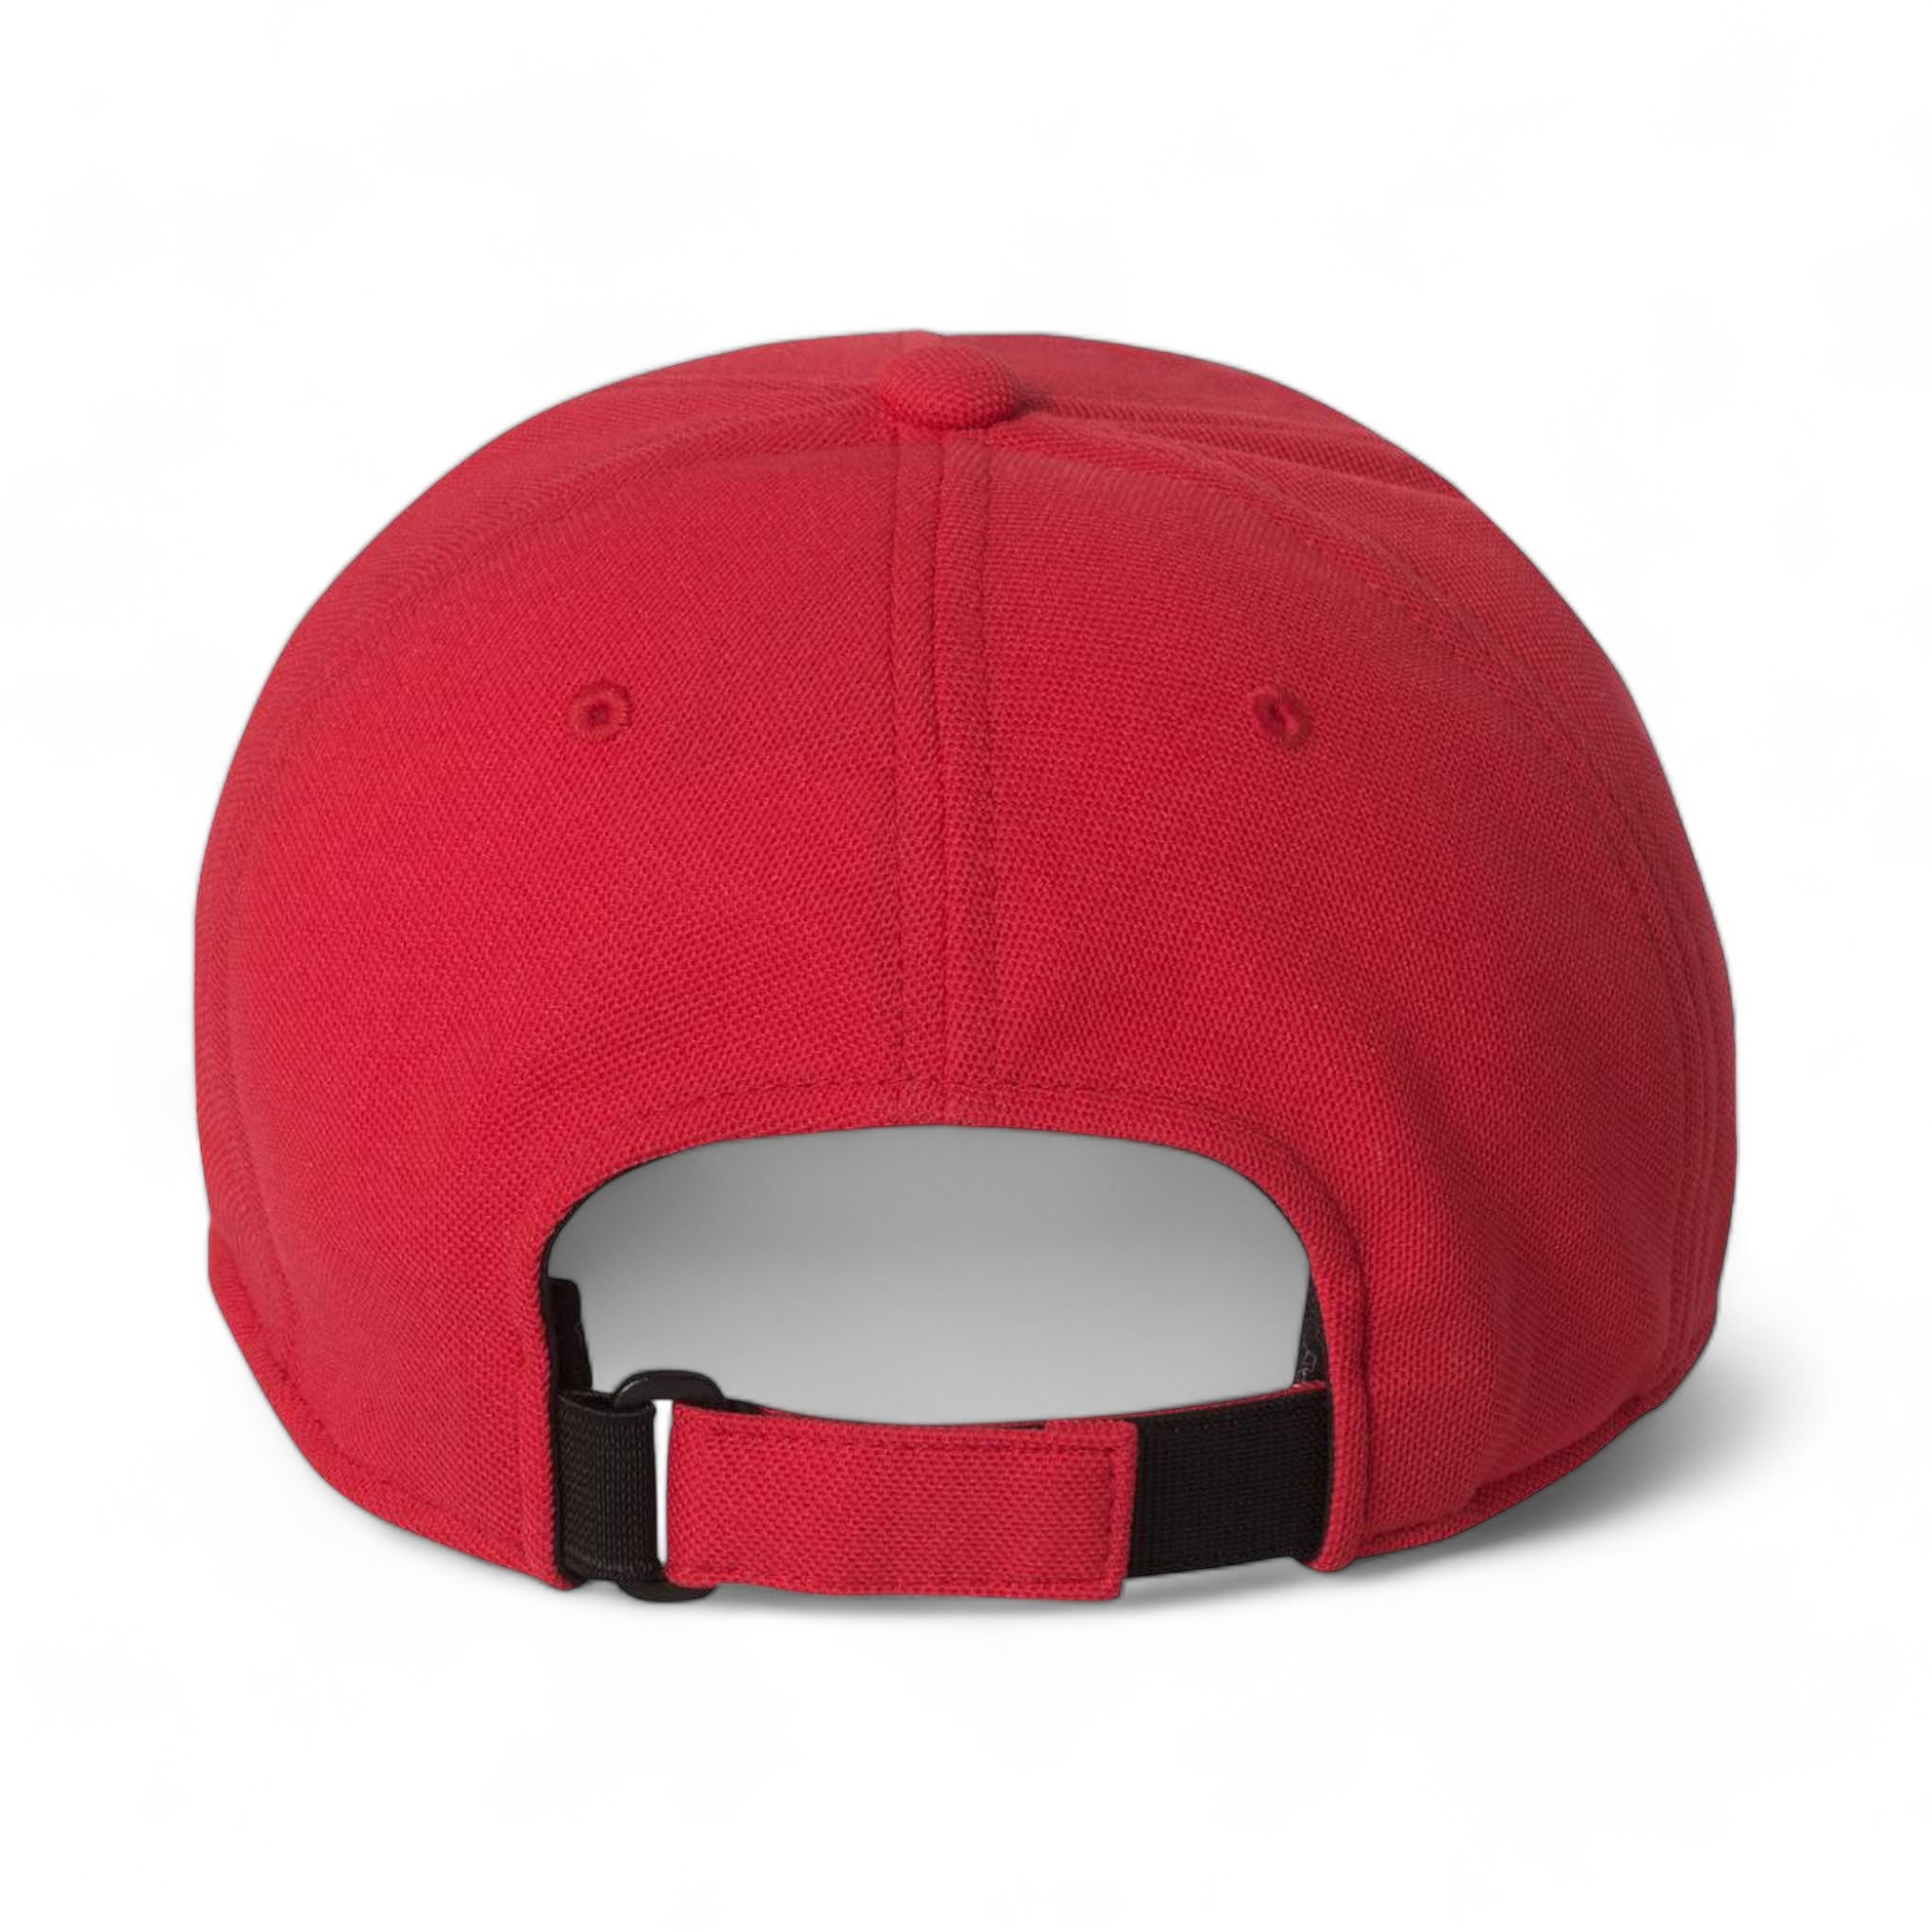 Back view of Flexfit 110P custom hat in red